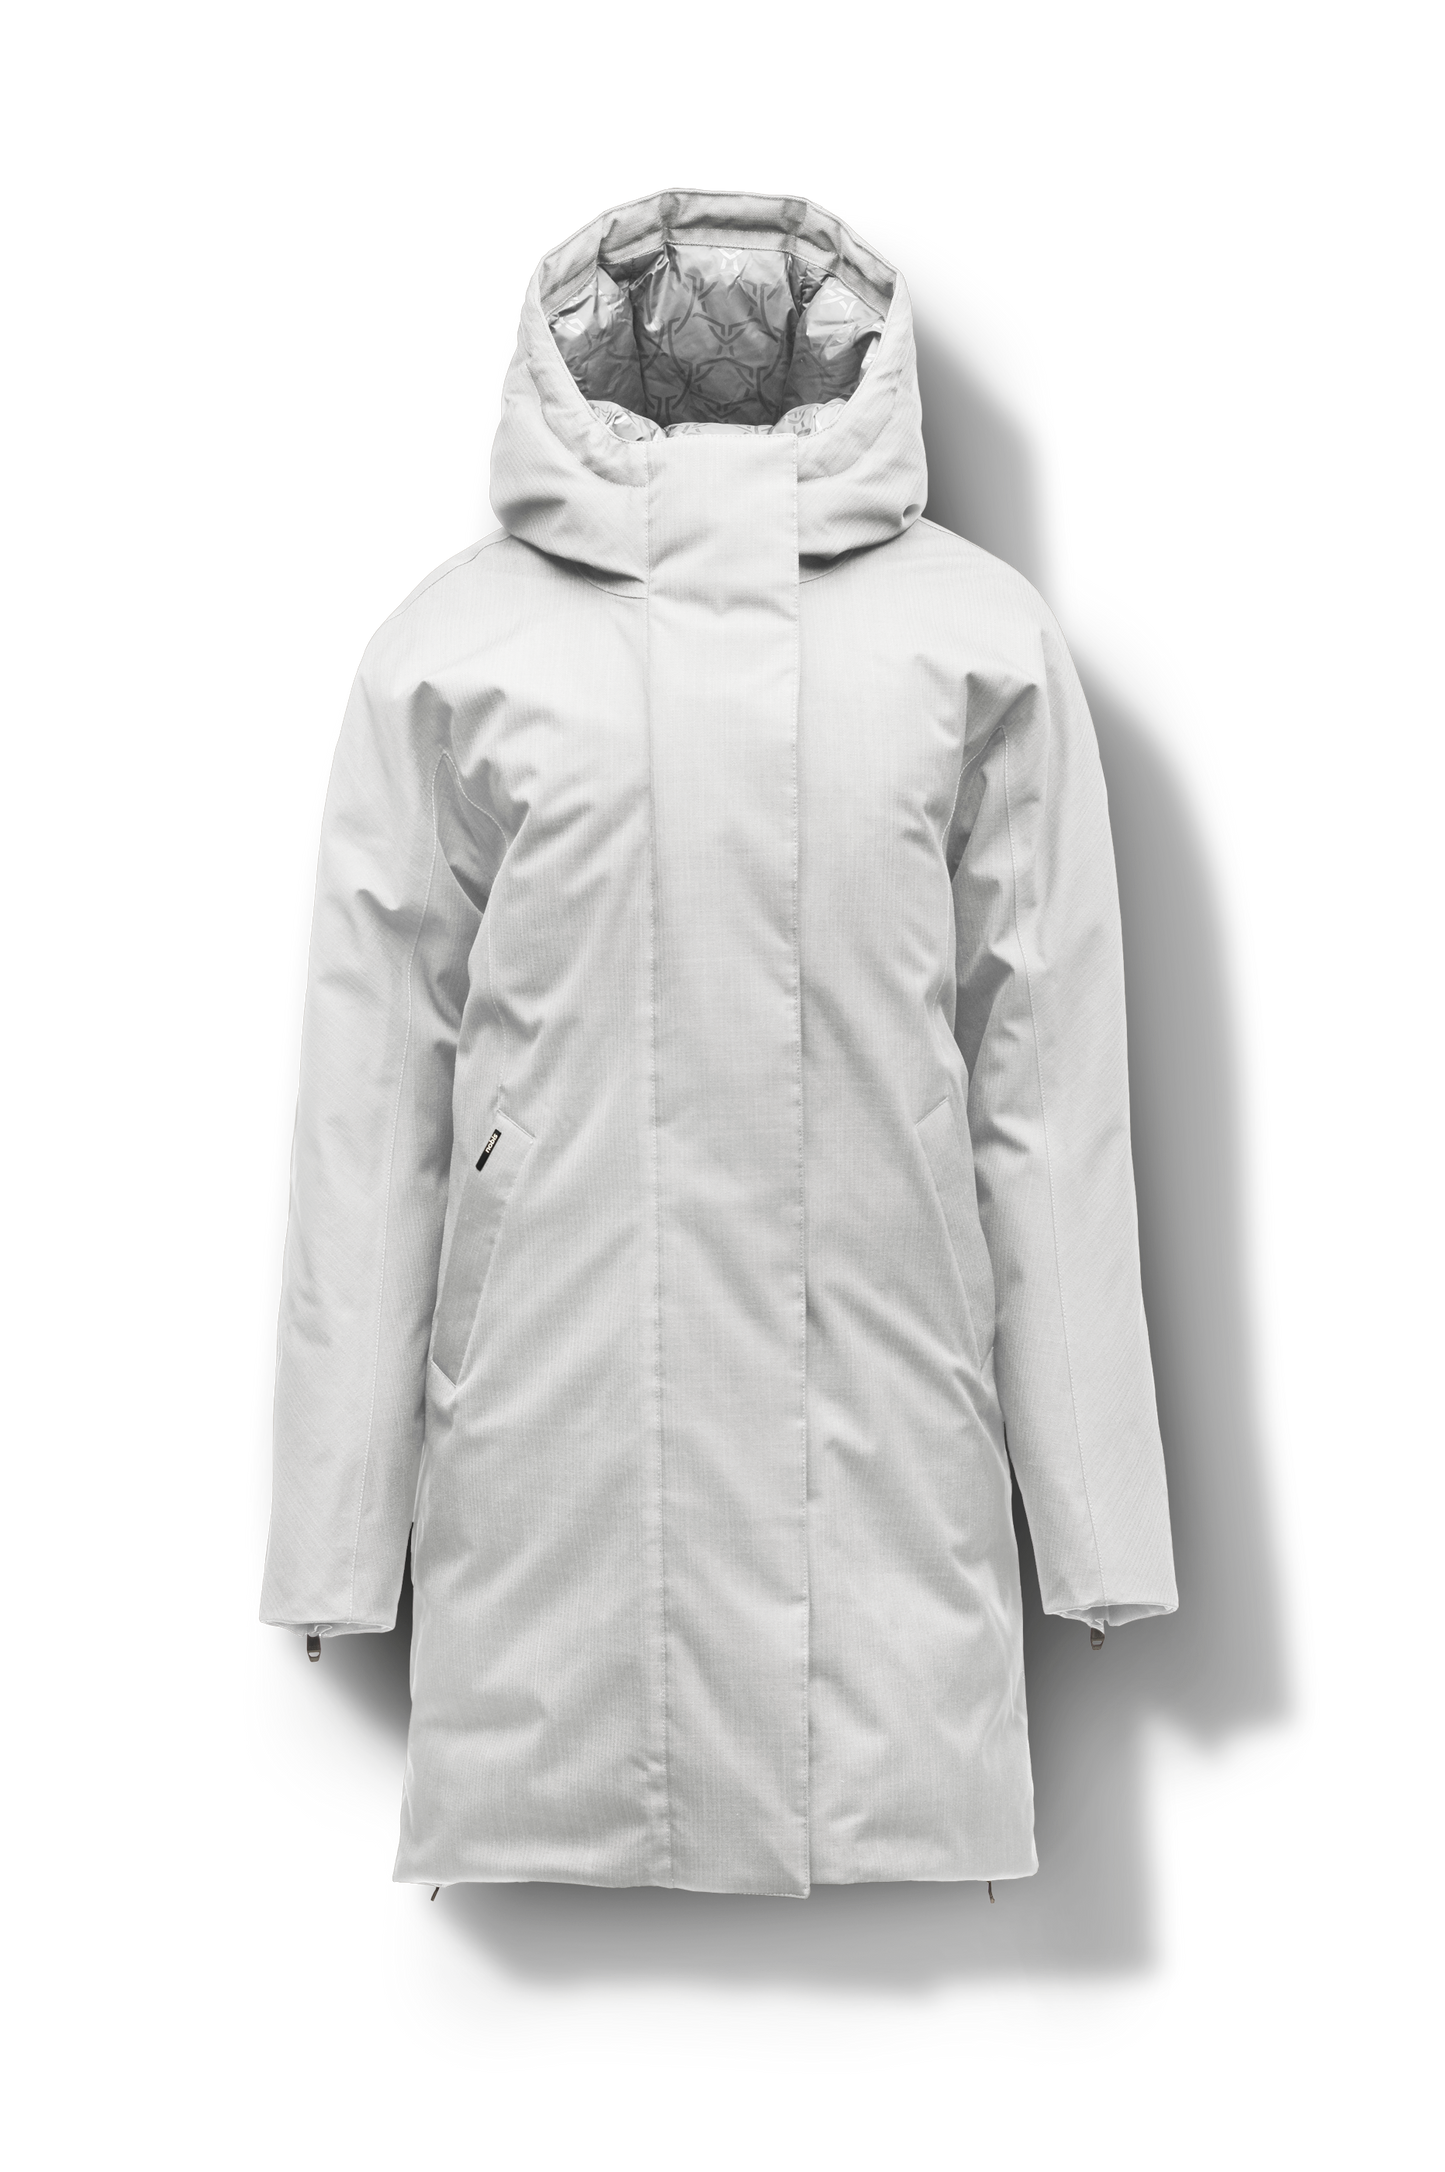 Dory Women's Tailored Back Zip Parka in knee length, premium Crosshatch fabrication, Premium Canadian White Duck Down insulation, non-removable down-filled hood, removable interior hood, centre front two-way zipper with wind flap, vertical zipper detailing along back, in Light Grey